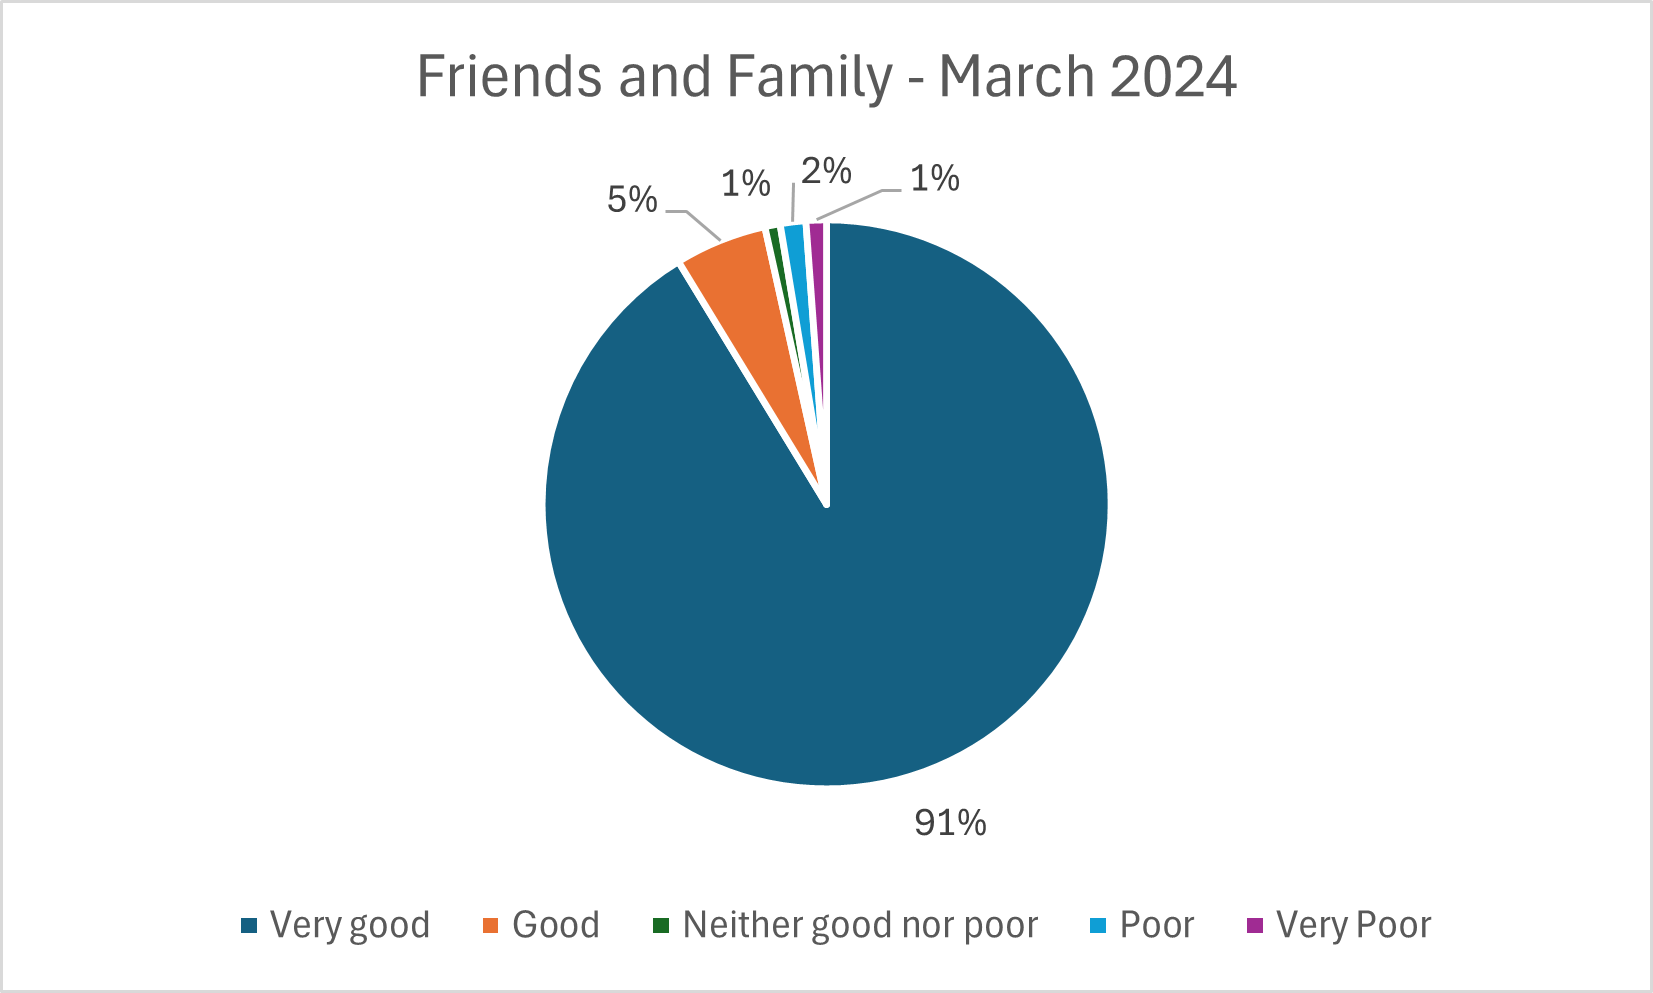 Friends and Family - March 2024